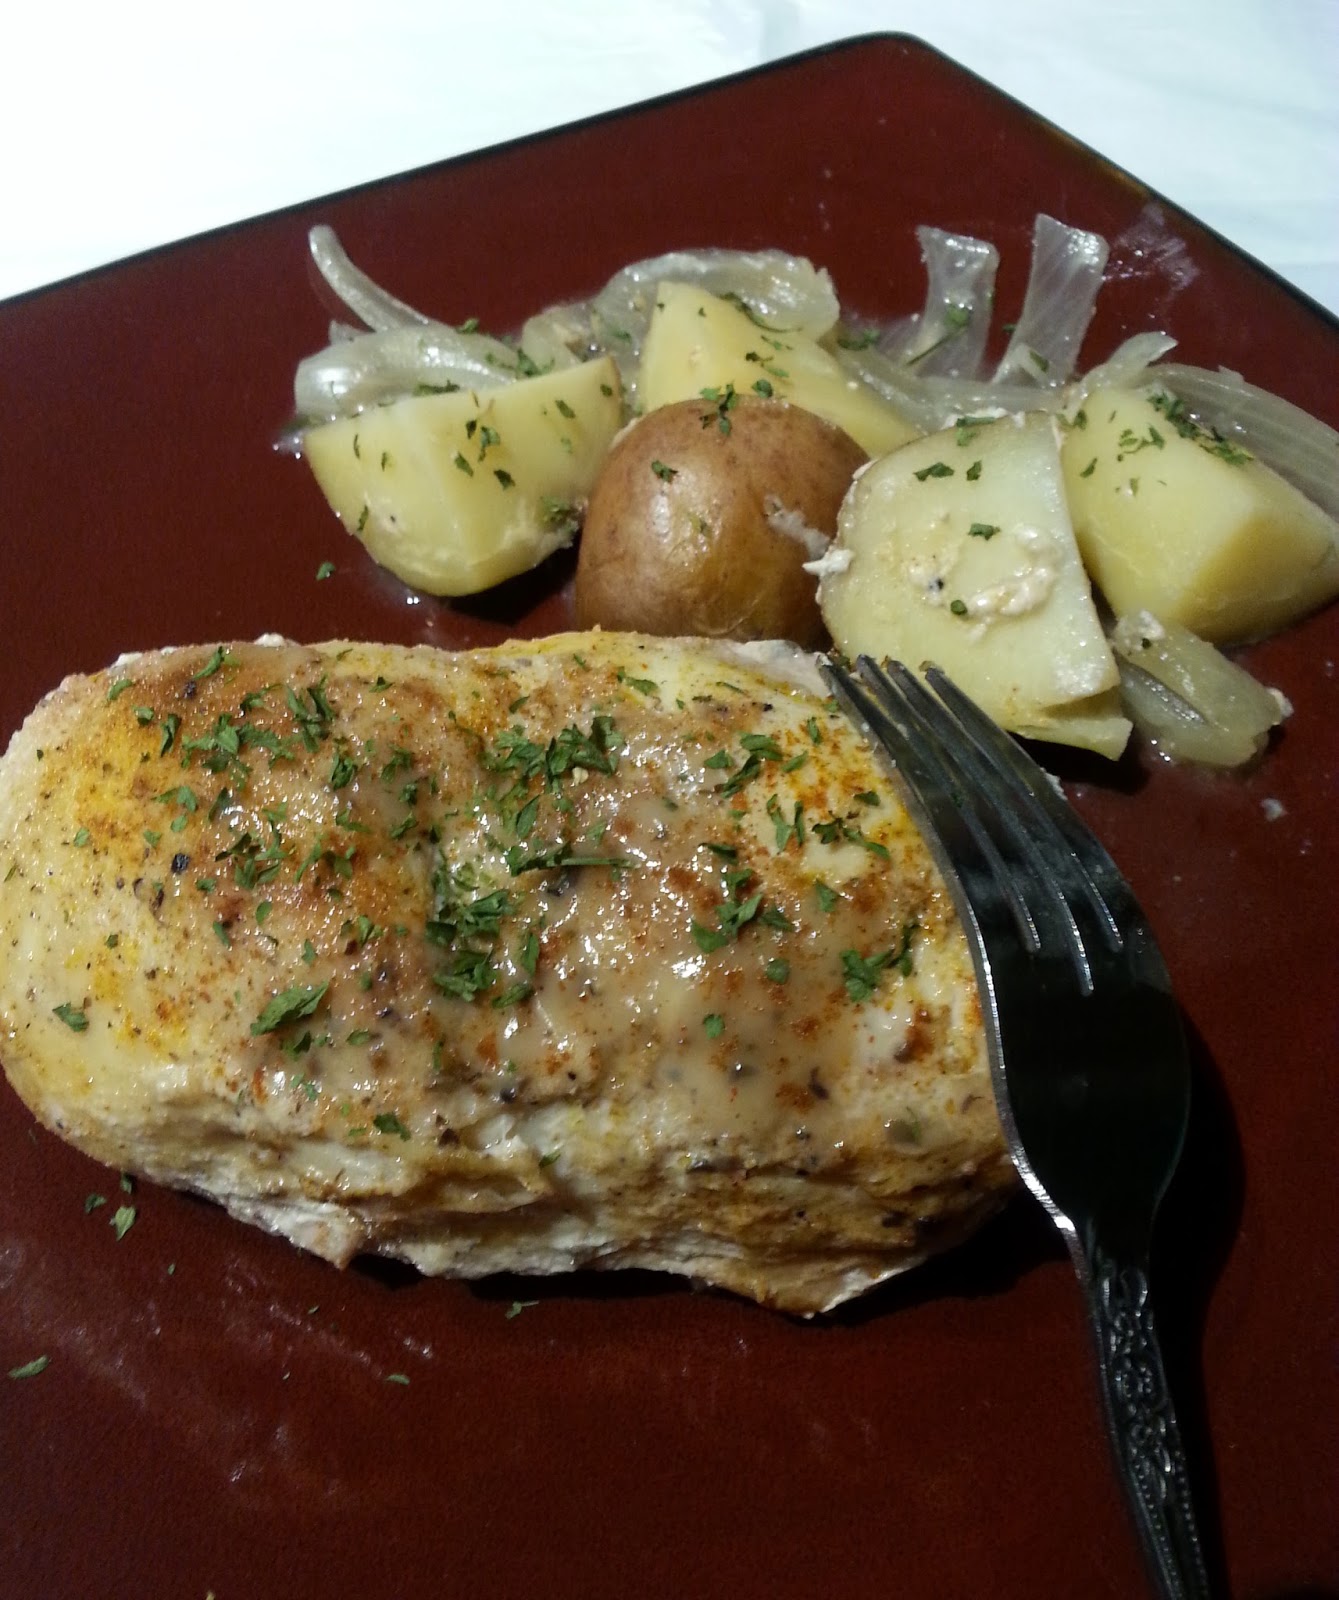 An image of slow cooker chicken and potatoes dish